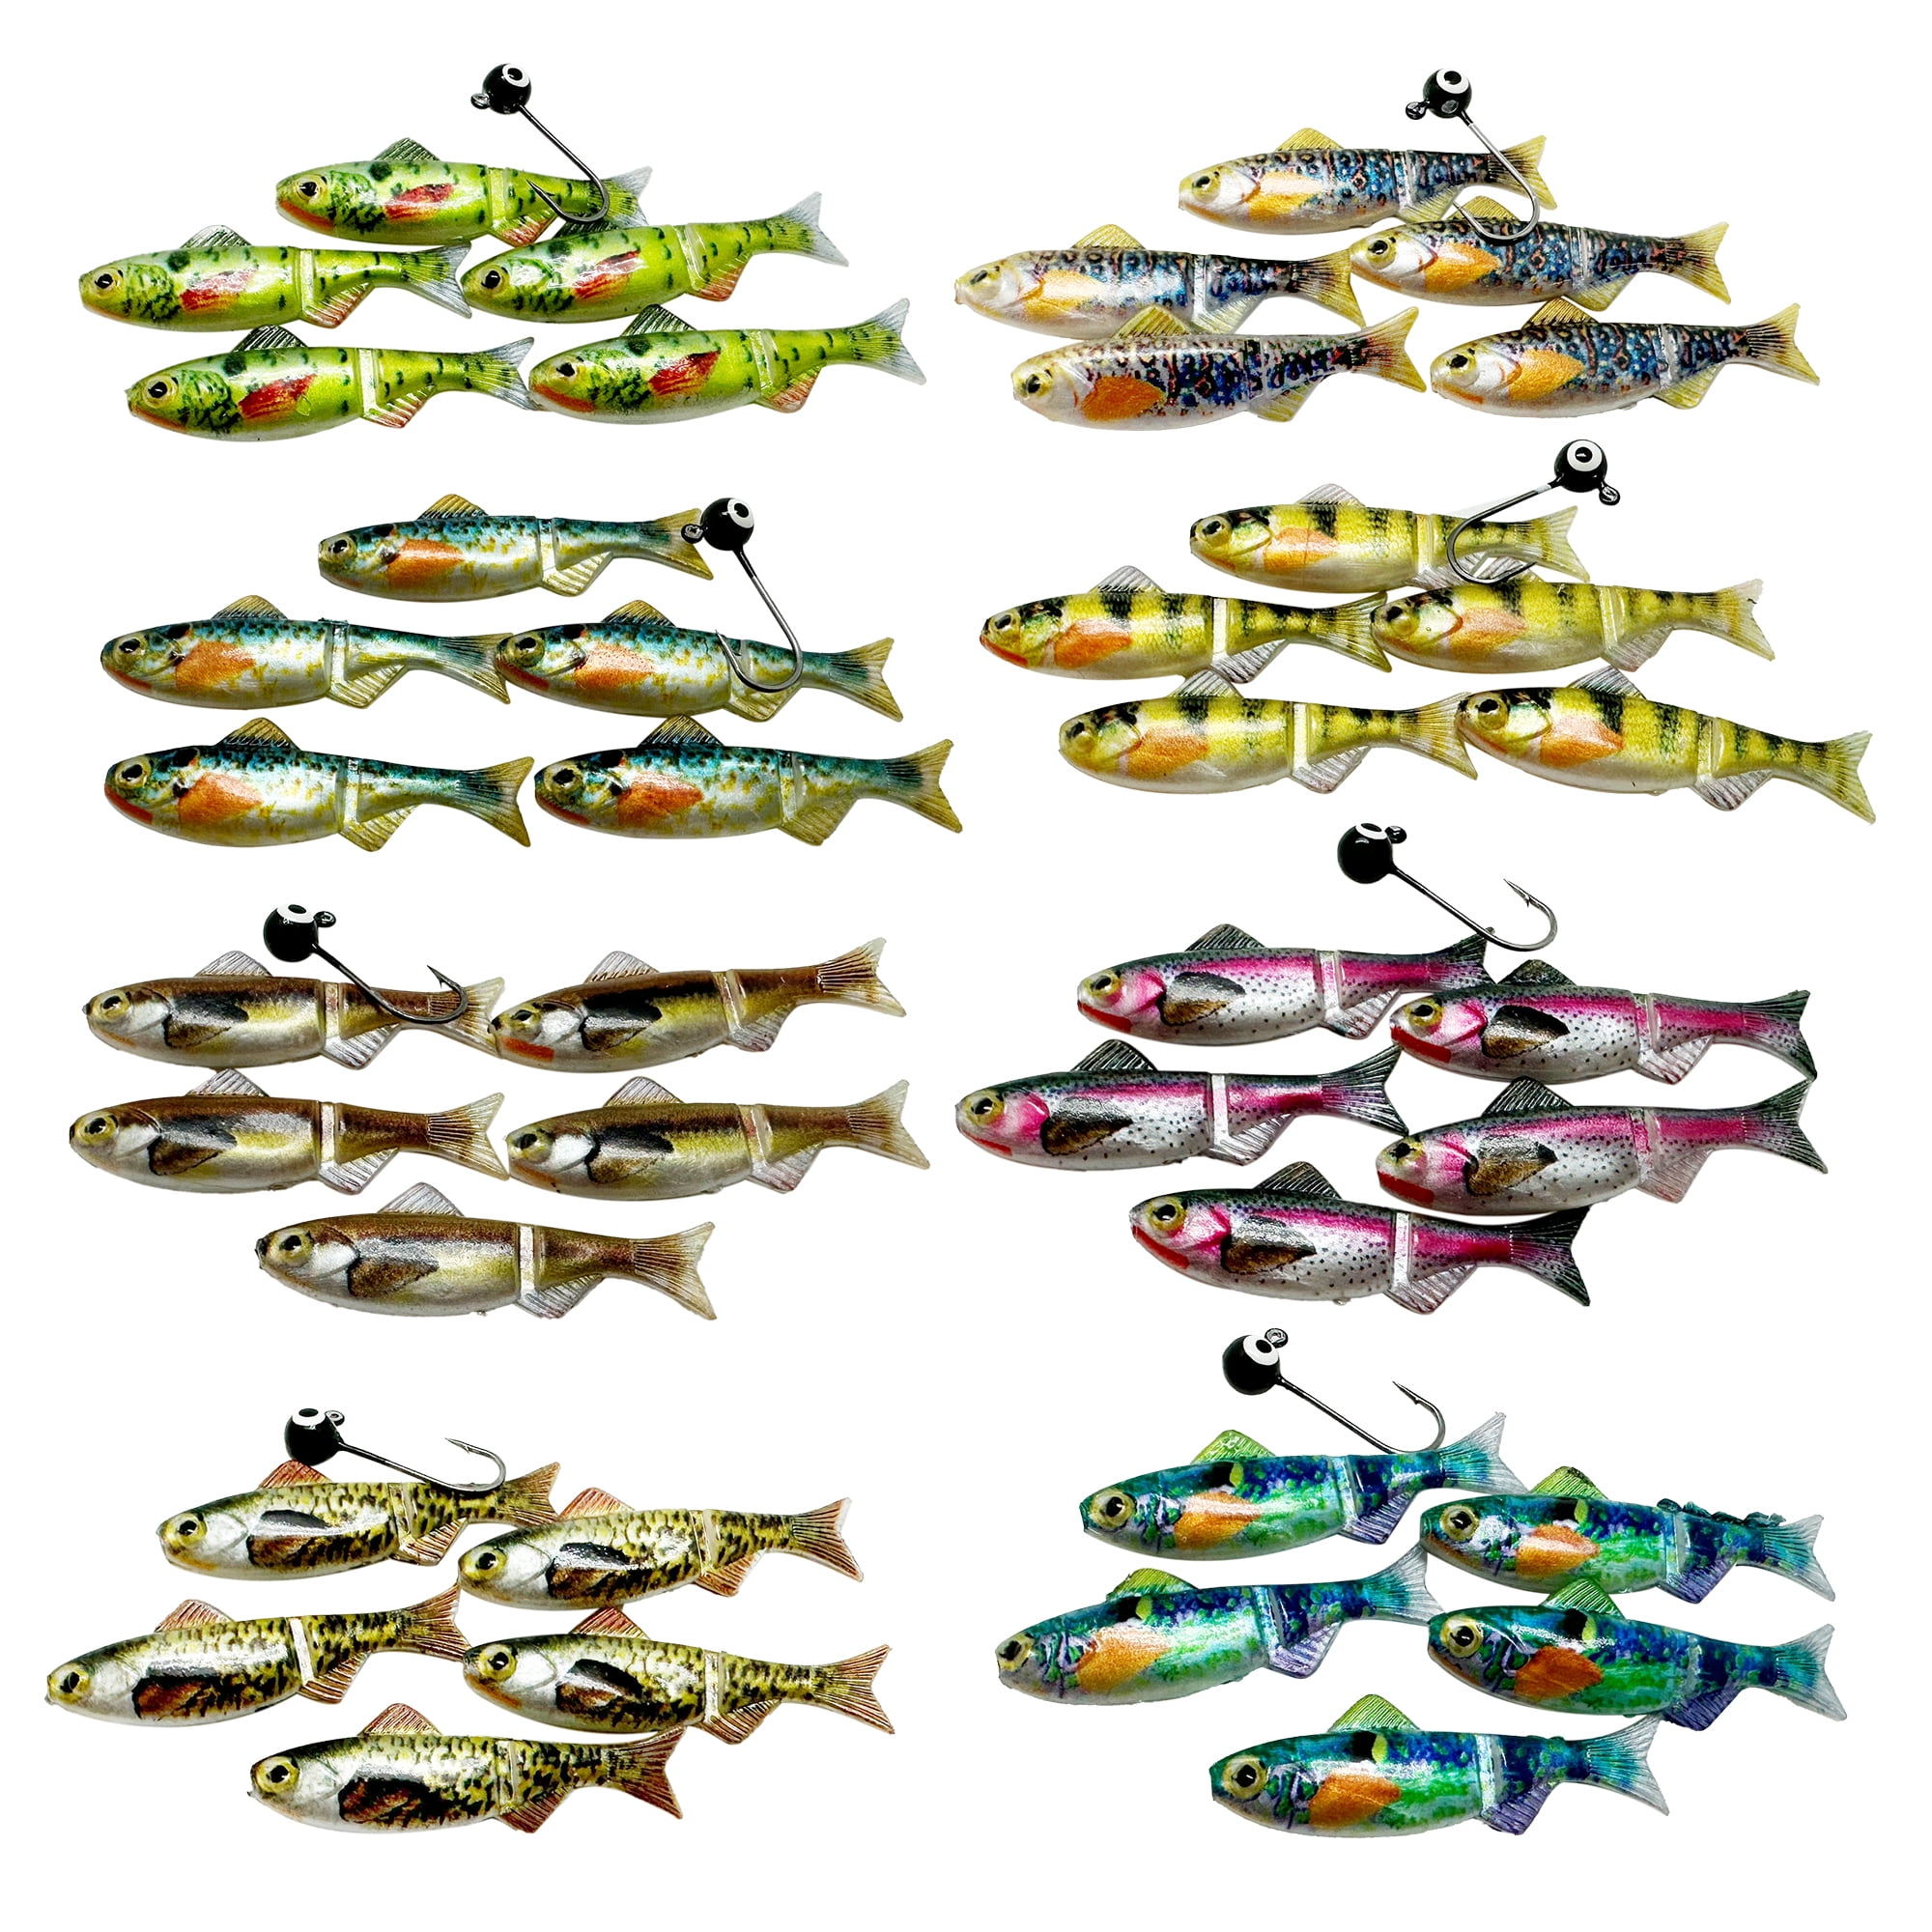 Crappie-Baits- Plastics-Jig-Heads-Kit-Shad-Fishing-Lures-for  Crappie-Panfish-Bluegill-20Piece Kit - 15 Bodies- 5 Crappie Jig Heads